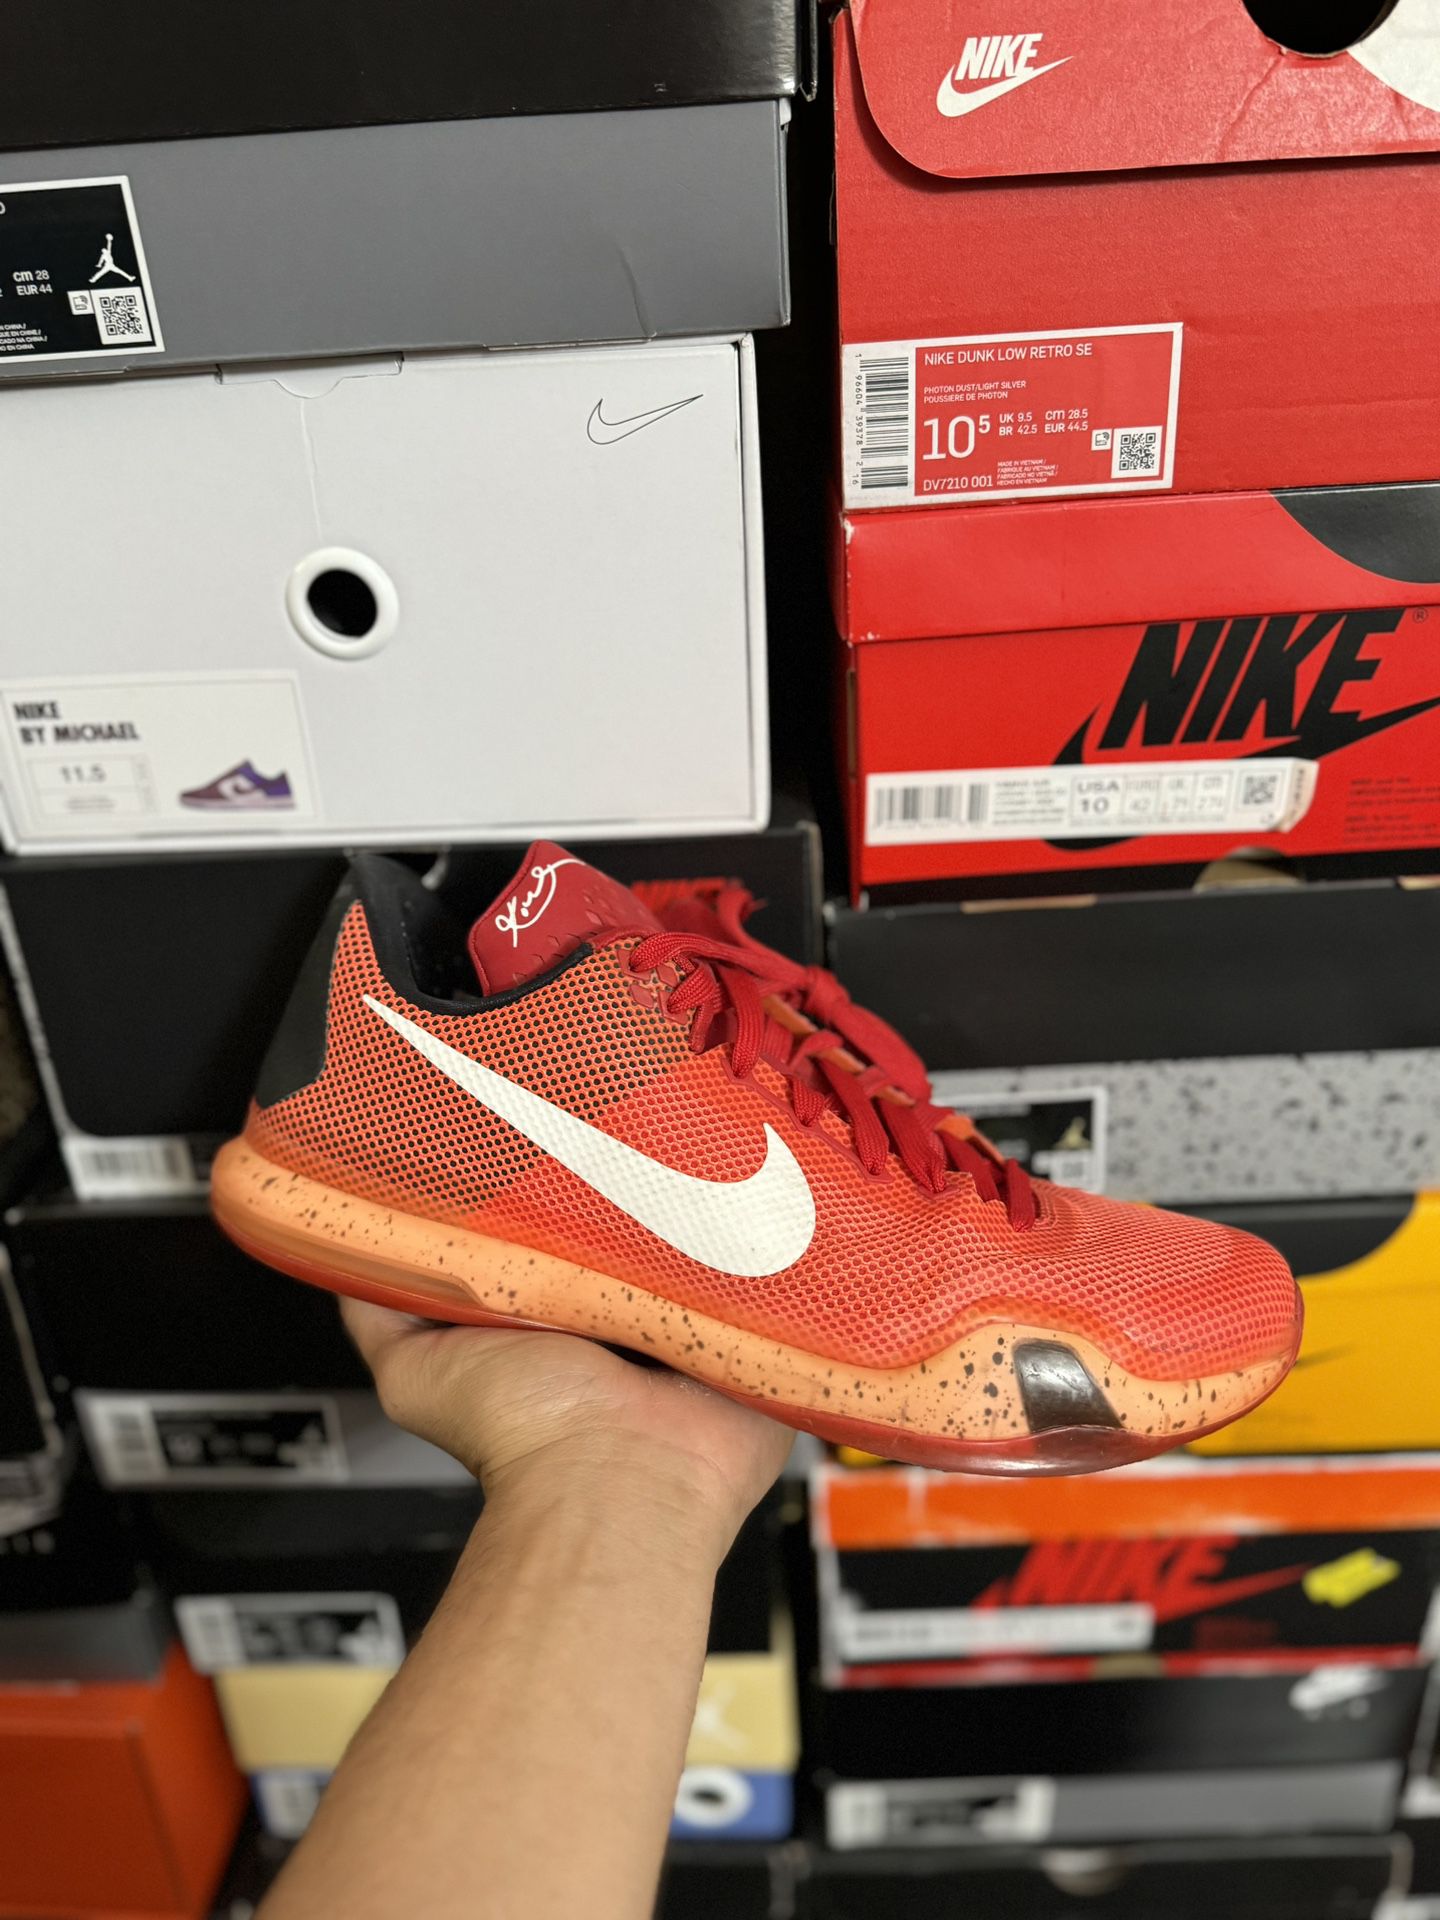 Kobe 10 Hot Lava size 11 USED But Clean